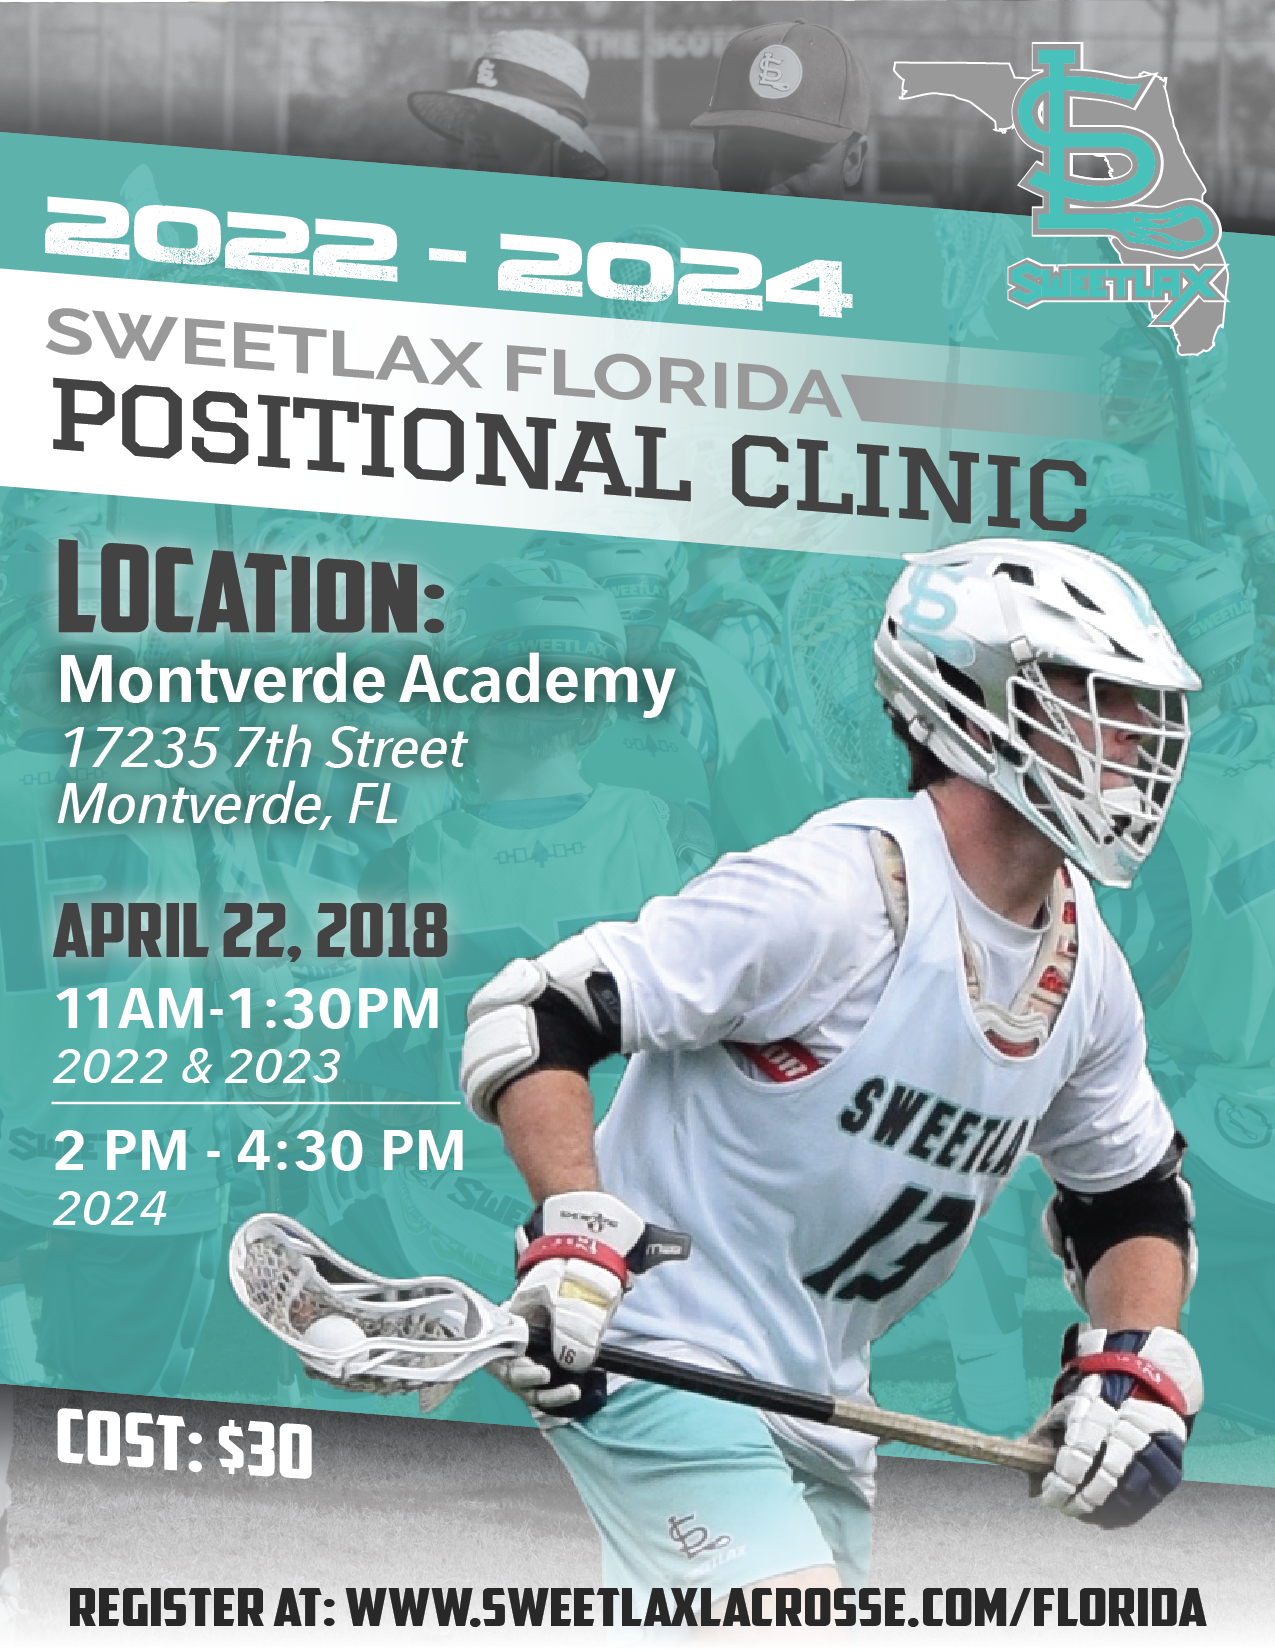 sweetlax-florida-2022-2025-tryout-positional-clinic-sweetlax-lacrosse